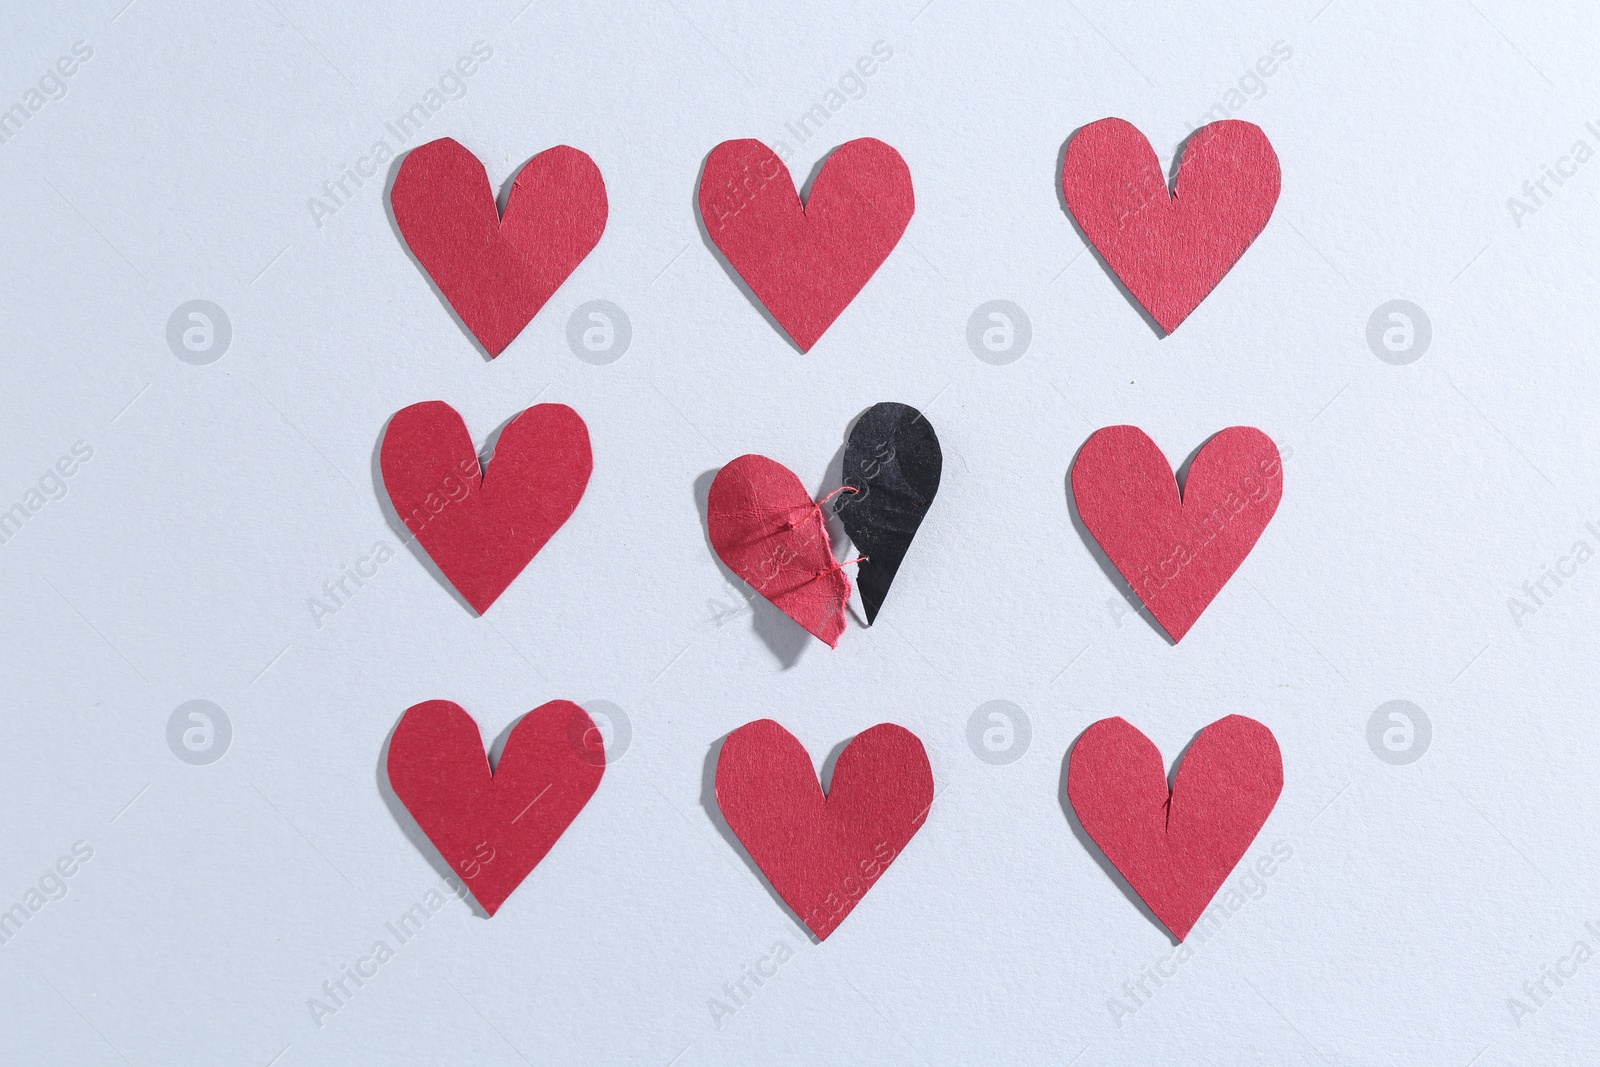 Photo of Halves of torn paper heart connected by thread and red decorative hearts on gray background, flat lay. Relationship problem concept